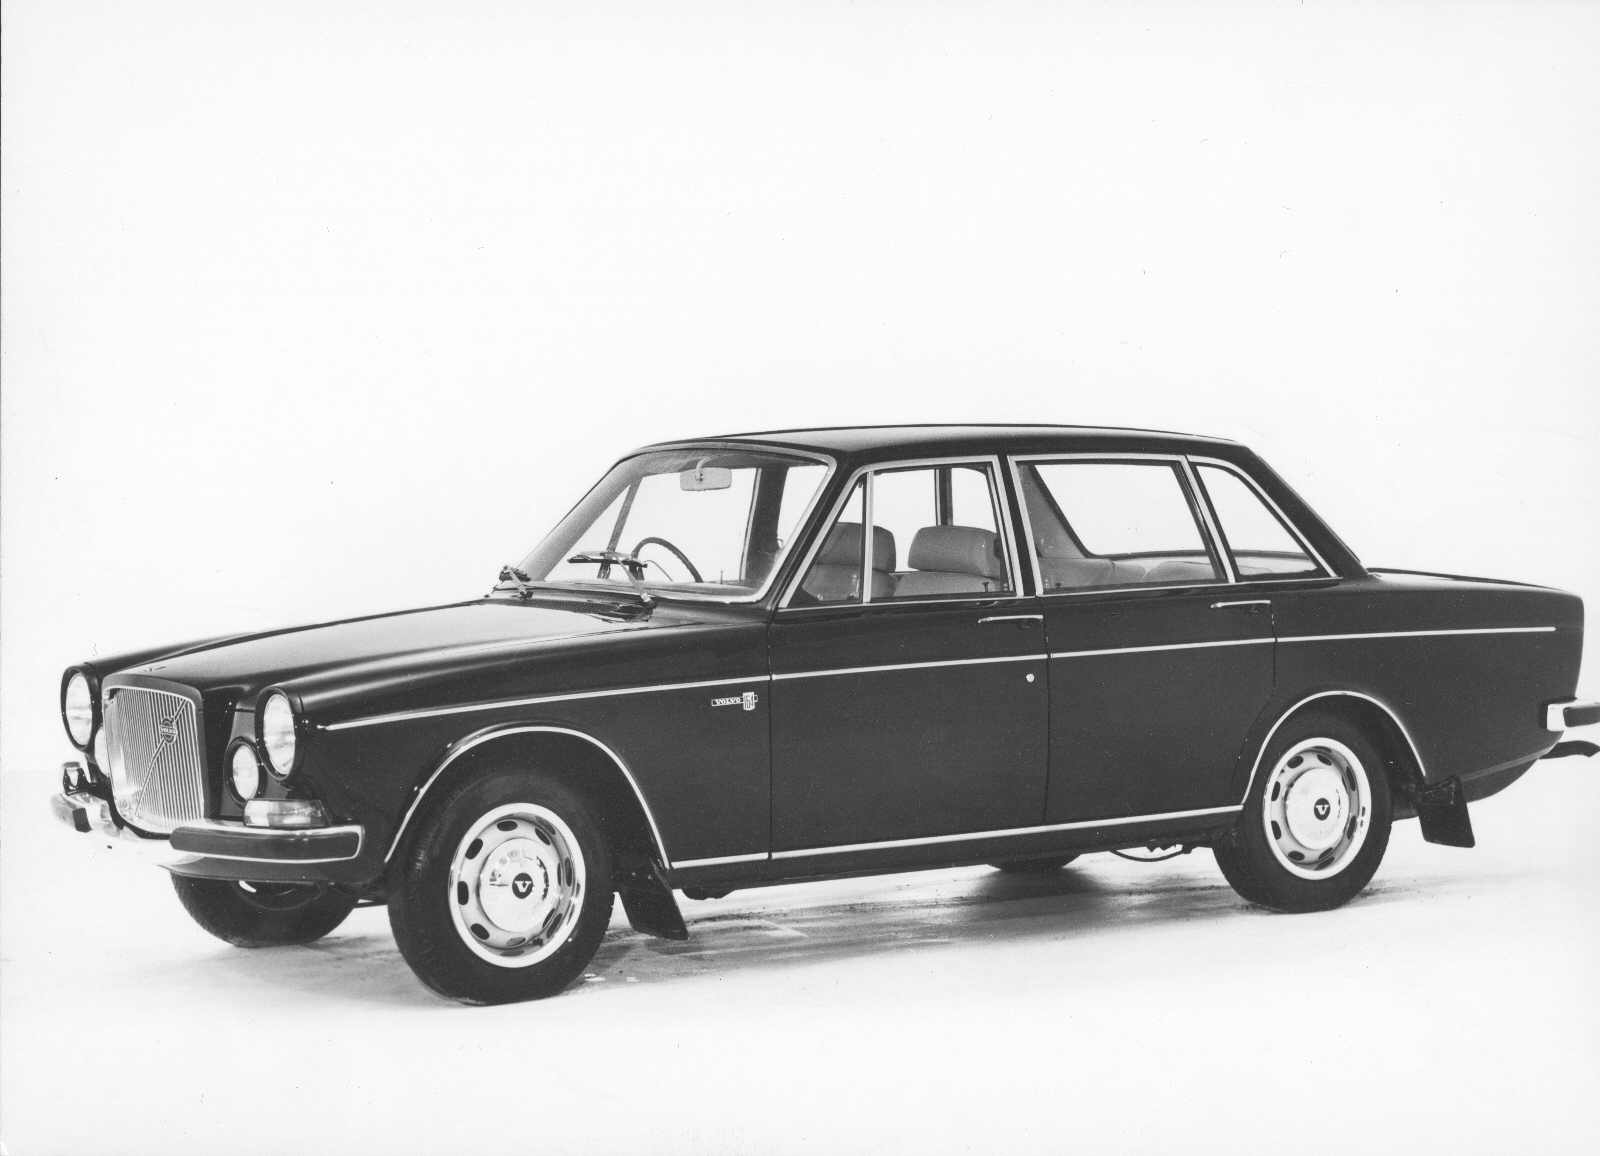 The W116 S-Class was the first